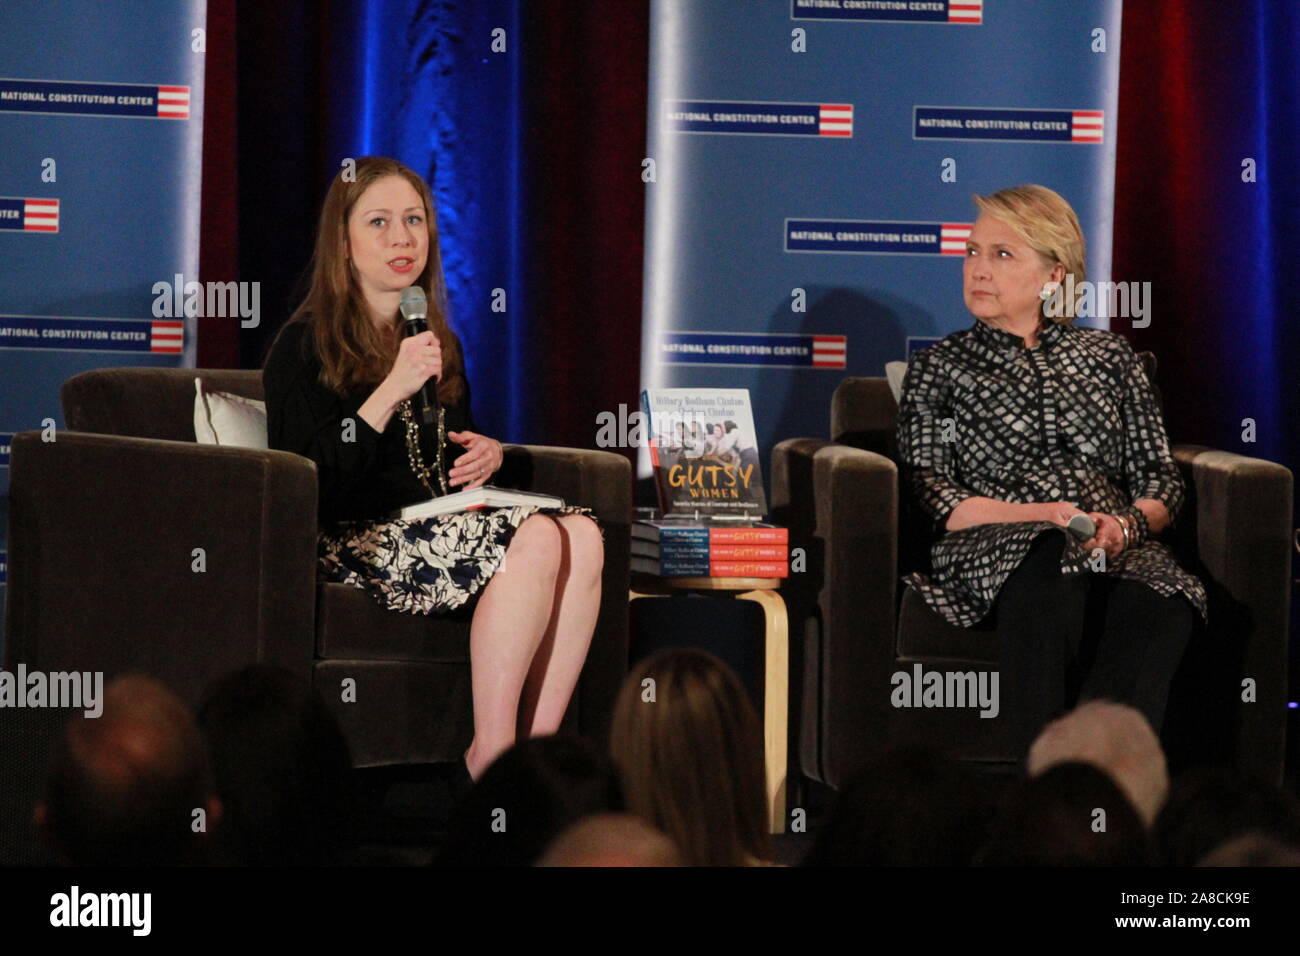 Authors Chelsea and Hillary Clinton promote their new book called "Gutsy Women" at the National Constitution Center in Philadelphia, Pennsylvania Featuring: Chelsea Clinton, Hillary Clinton Where: Philadelphia, Pennsylvania, United States When: 07 Oct 2019 Credit: W.Wade/WENN Stock Photo